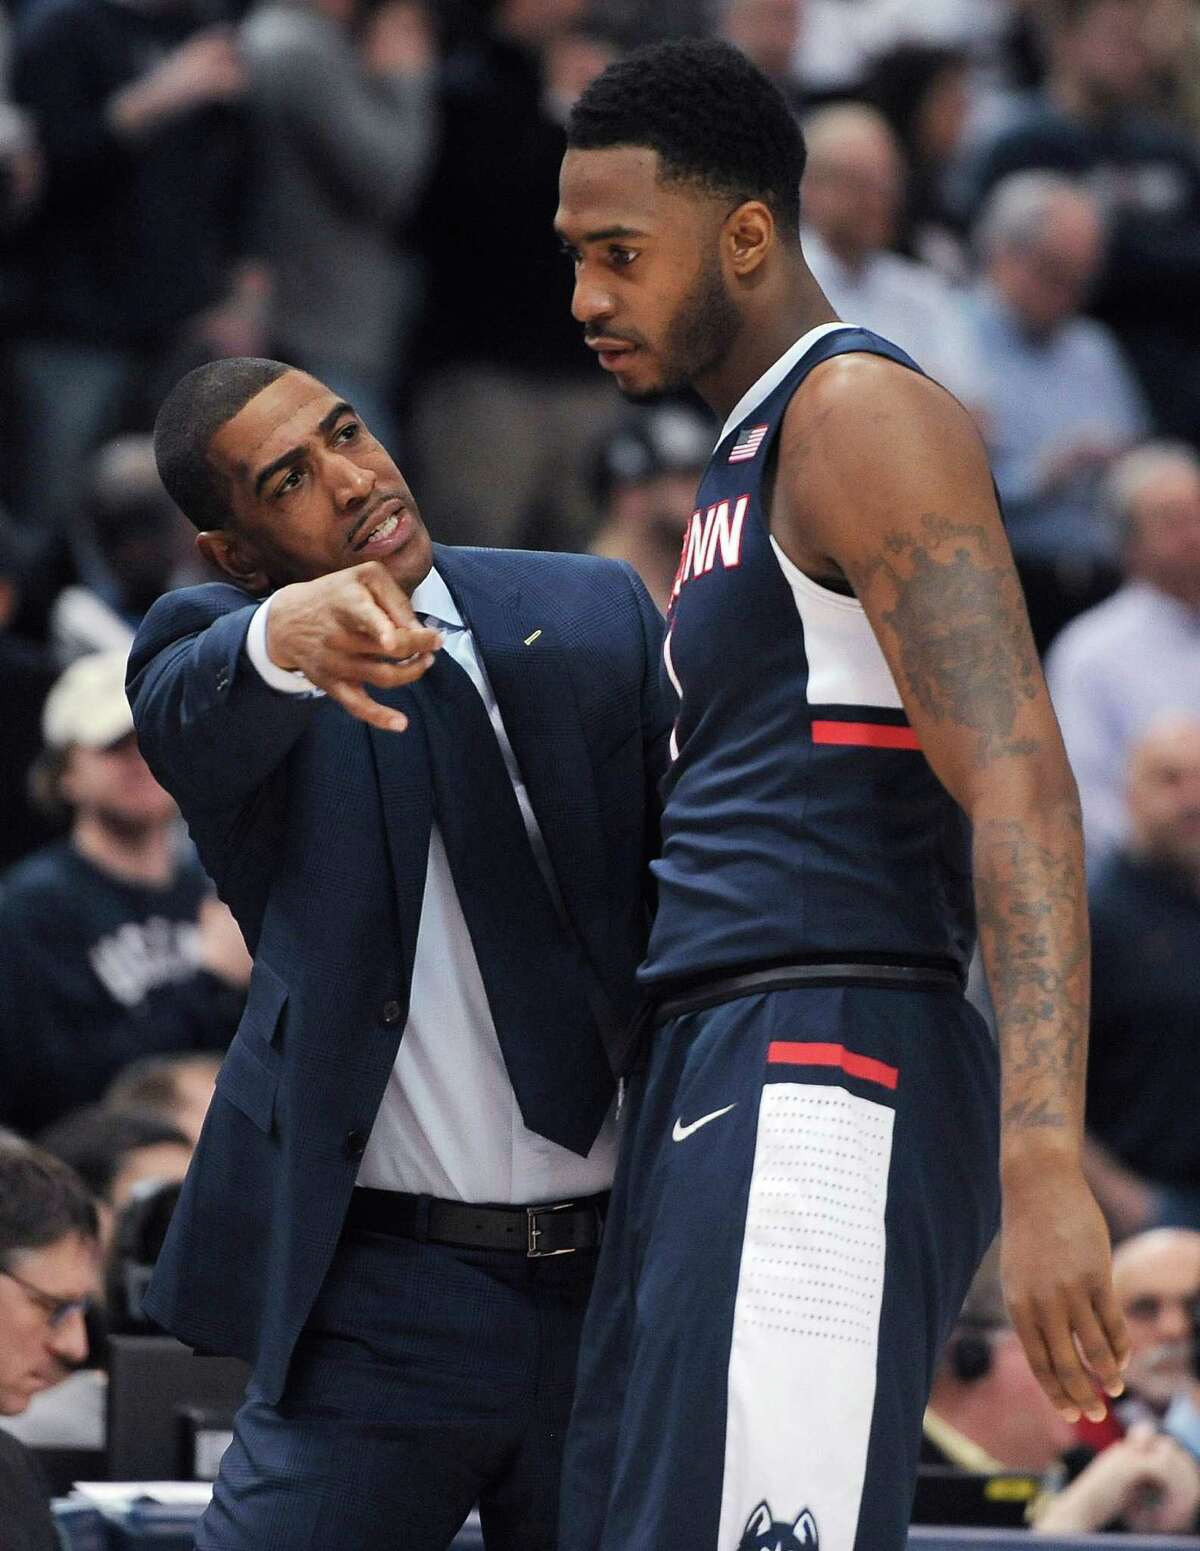 Connecticut coach Kevin Ollie talks with Phillip Nolan during the first half of an NCAA college basketball game against Cincinnati in the quarterfinals of the American Athletic Conference tournament, Friday, March 13, 2015, in Hartford, Conn.